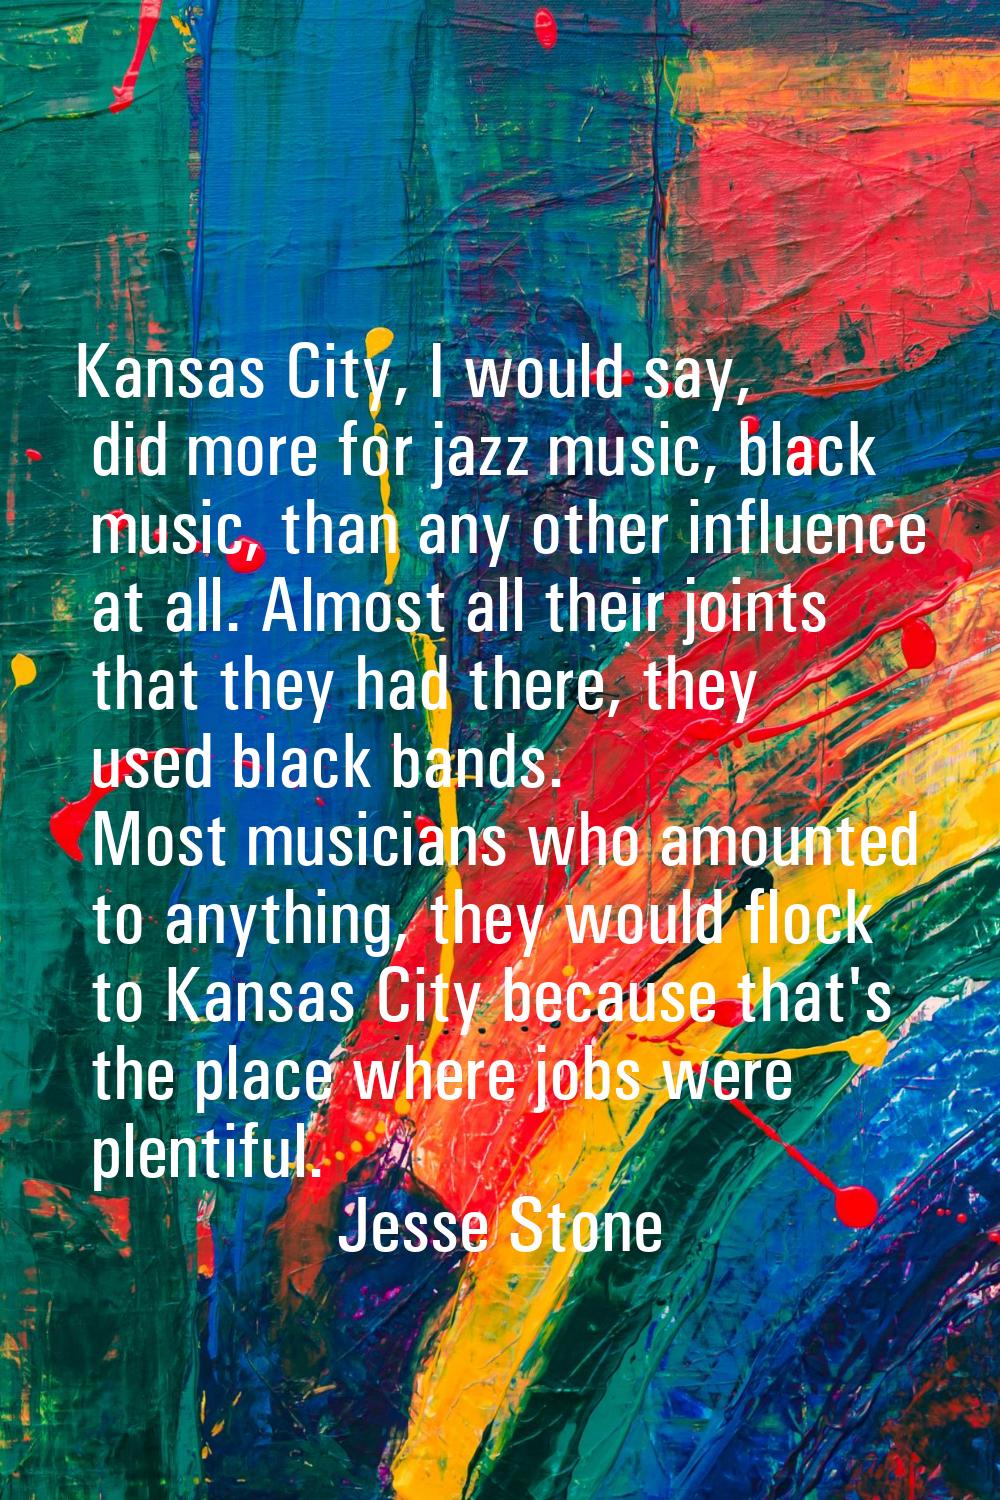 Kansas City, I would say, did more for jazz music, black music, than any other influence at all. Al